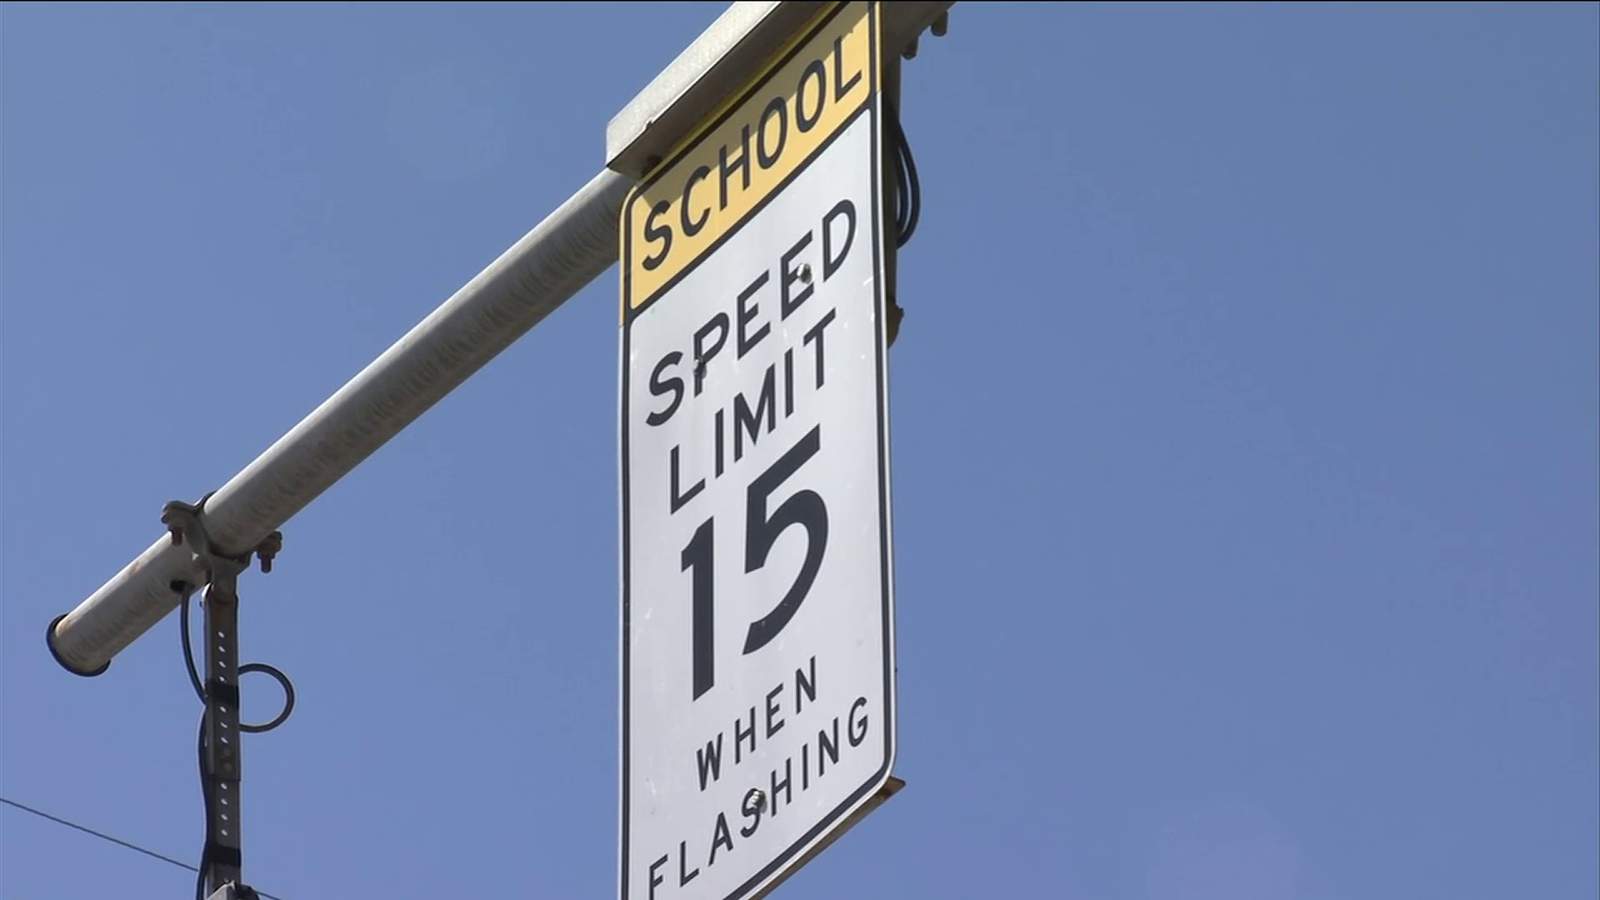 Camera enforcement proposed for school zones could cost speeders